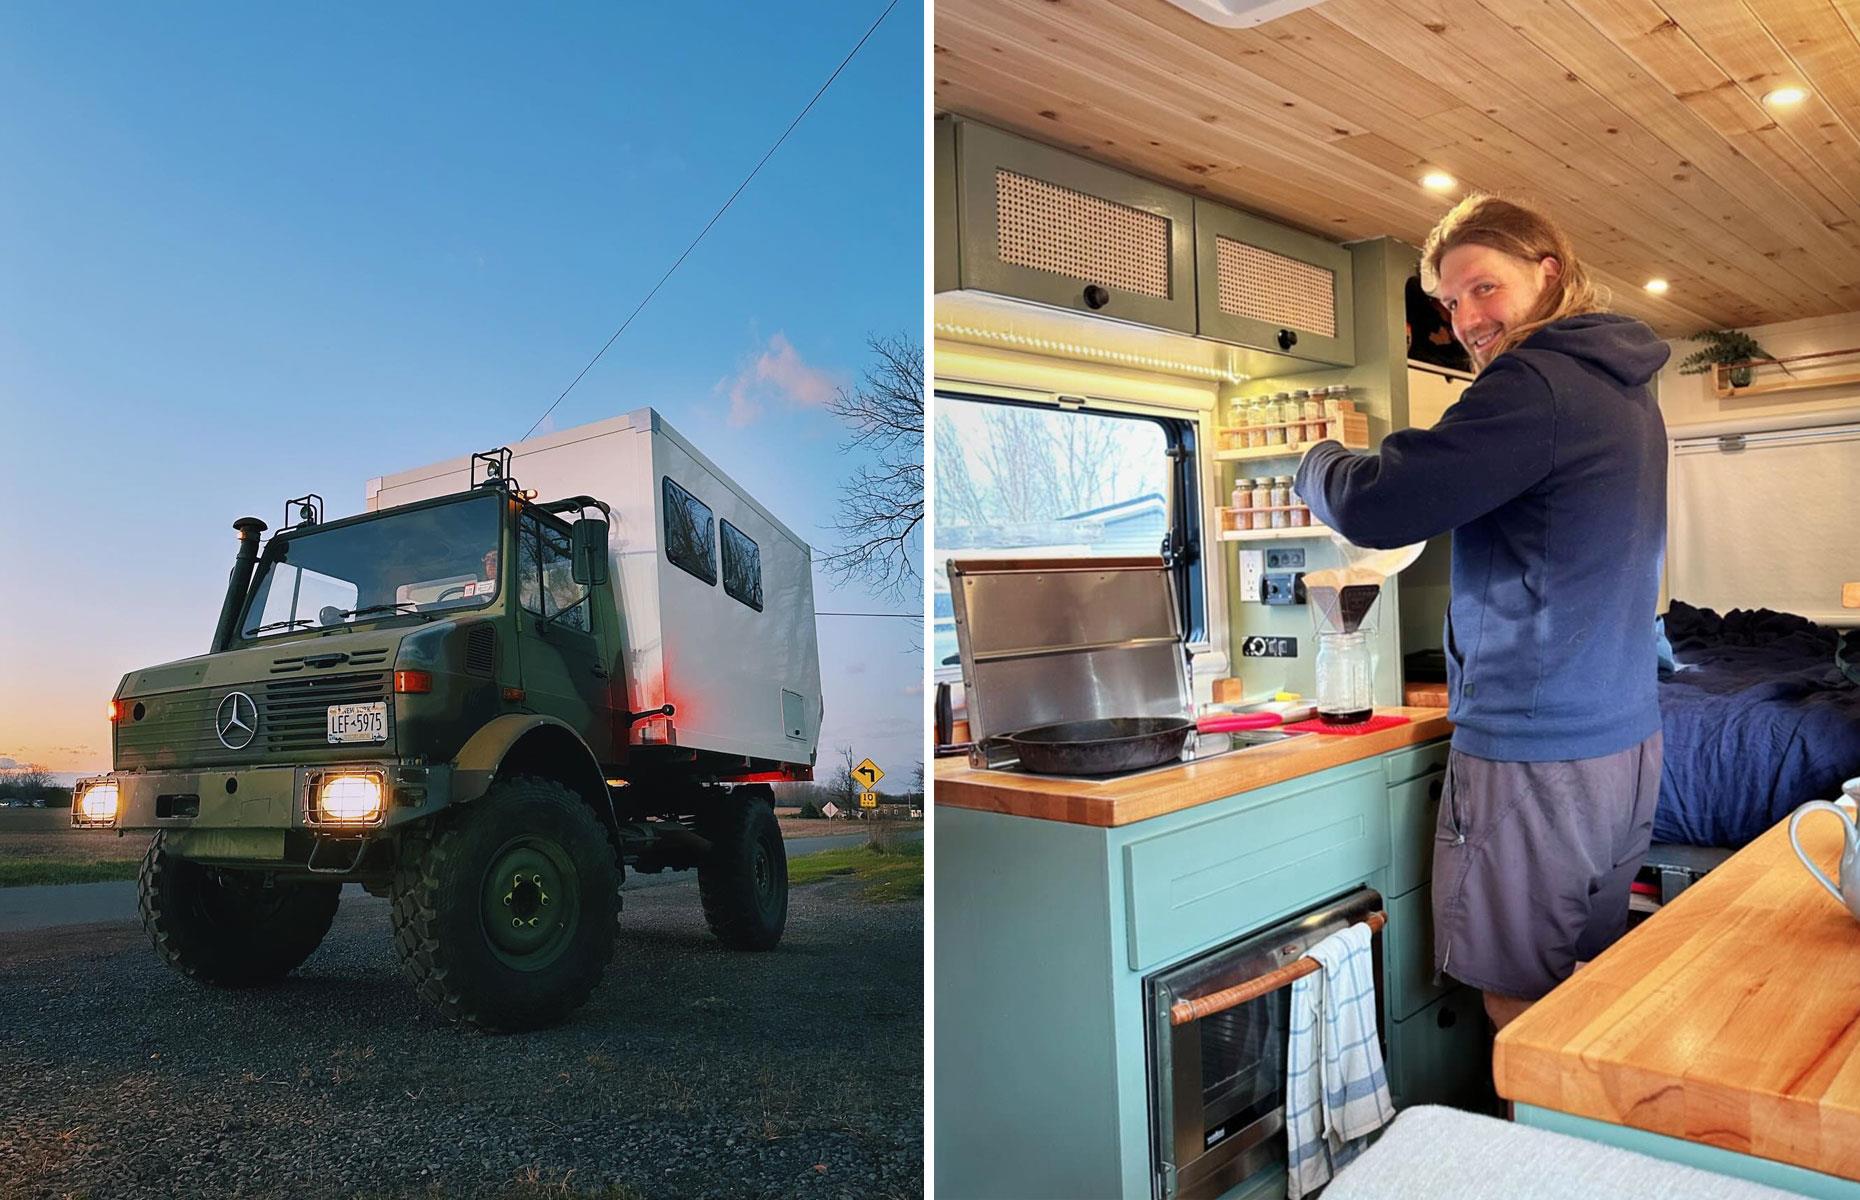 <p>Bitten by the motorhome makeover bug, Savannah and Drew have since purchased their dream vehicle: a 1987 Mercedes-Benz Unimog 1300L, an ex-German military ambulance. They are currently in the process of converting the rig into their full-time home. Once complete, the couple are looking forward to taking their tiny-but-tough home on wheels on off-grid adventures with their two dogs, Pablo and Mateo. </p>